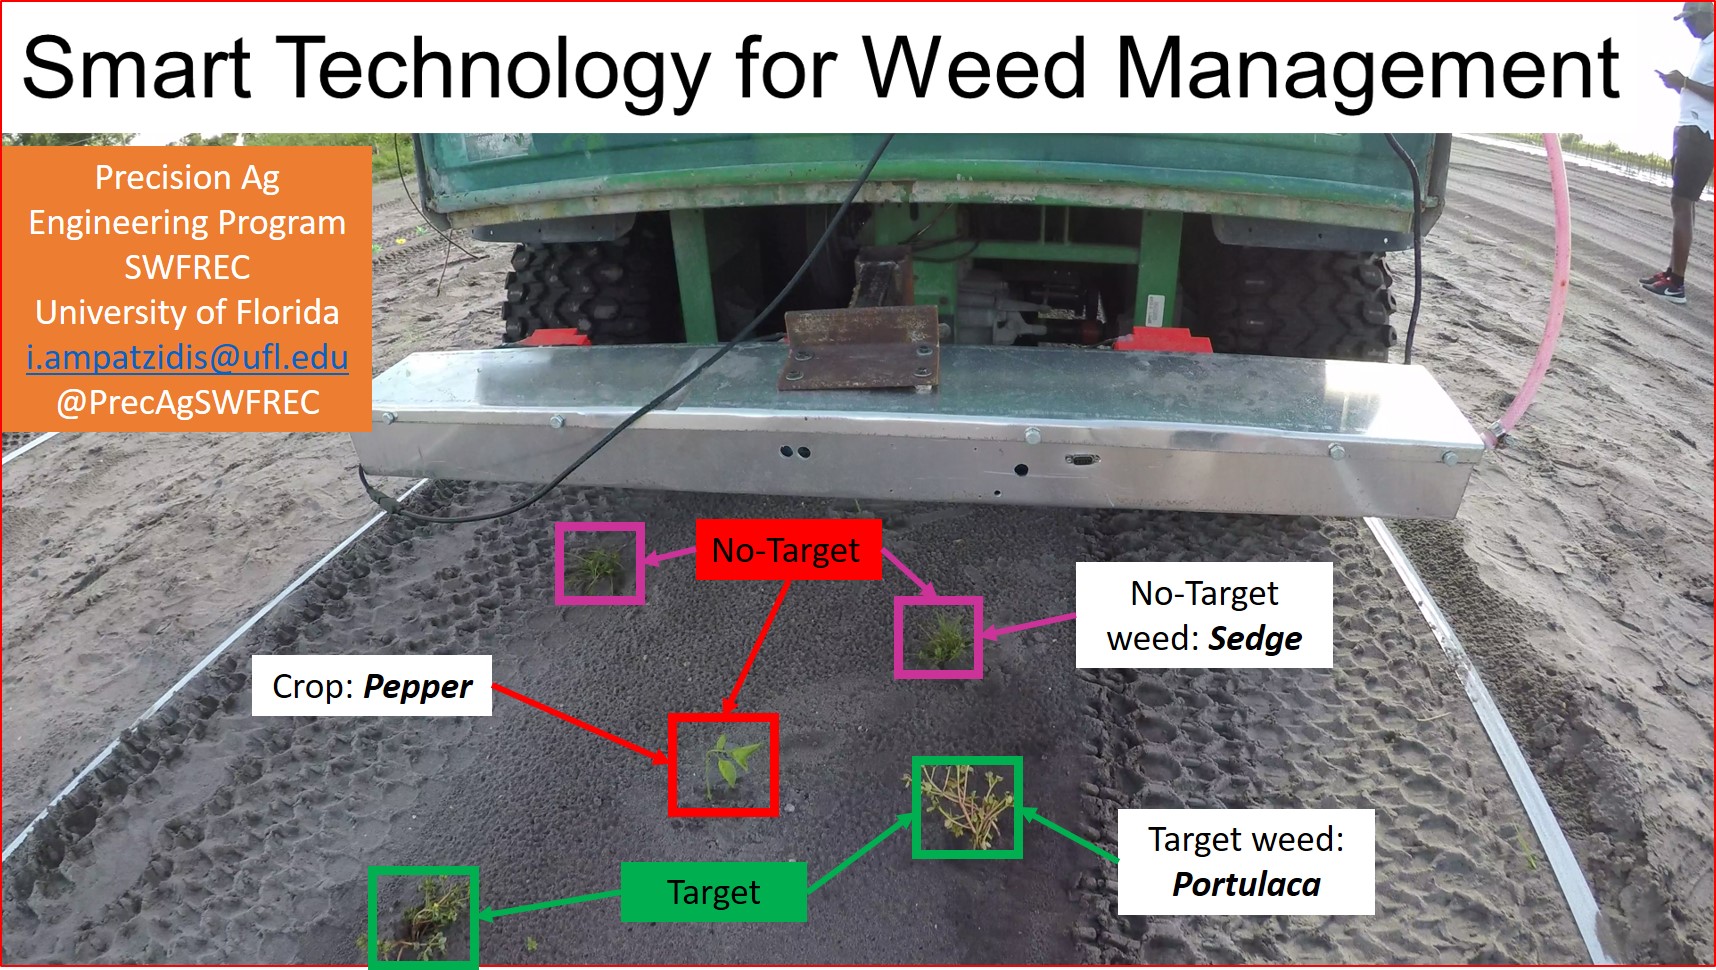 The parts of a smart weed management sprayer are depicted.